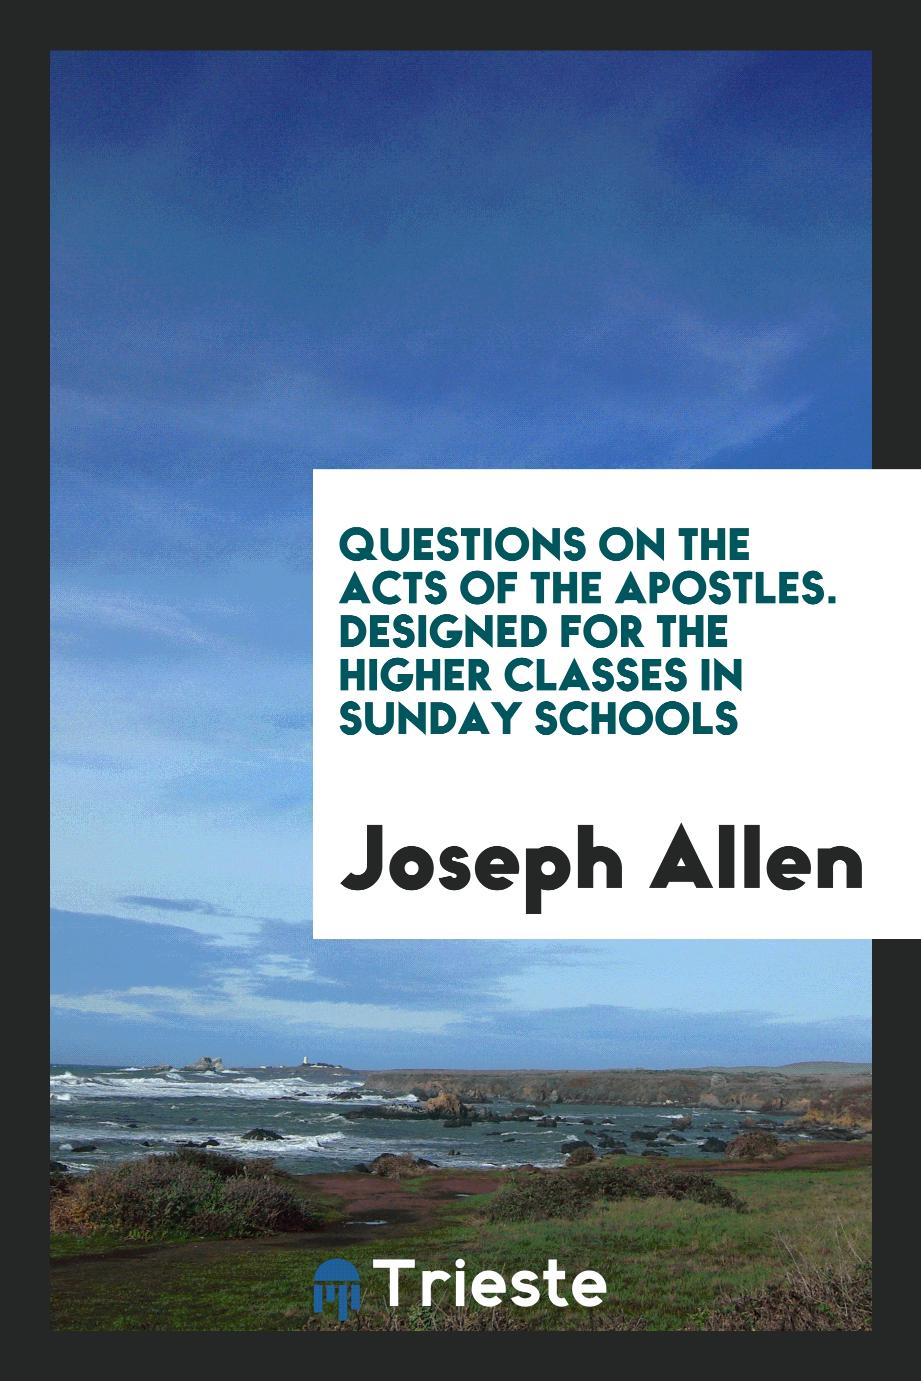 Questions on the Acts of the Apostles. Designed for the Higher Classes in Sunday Schools